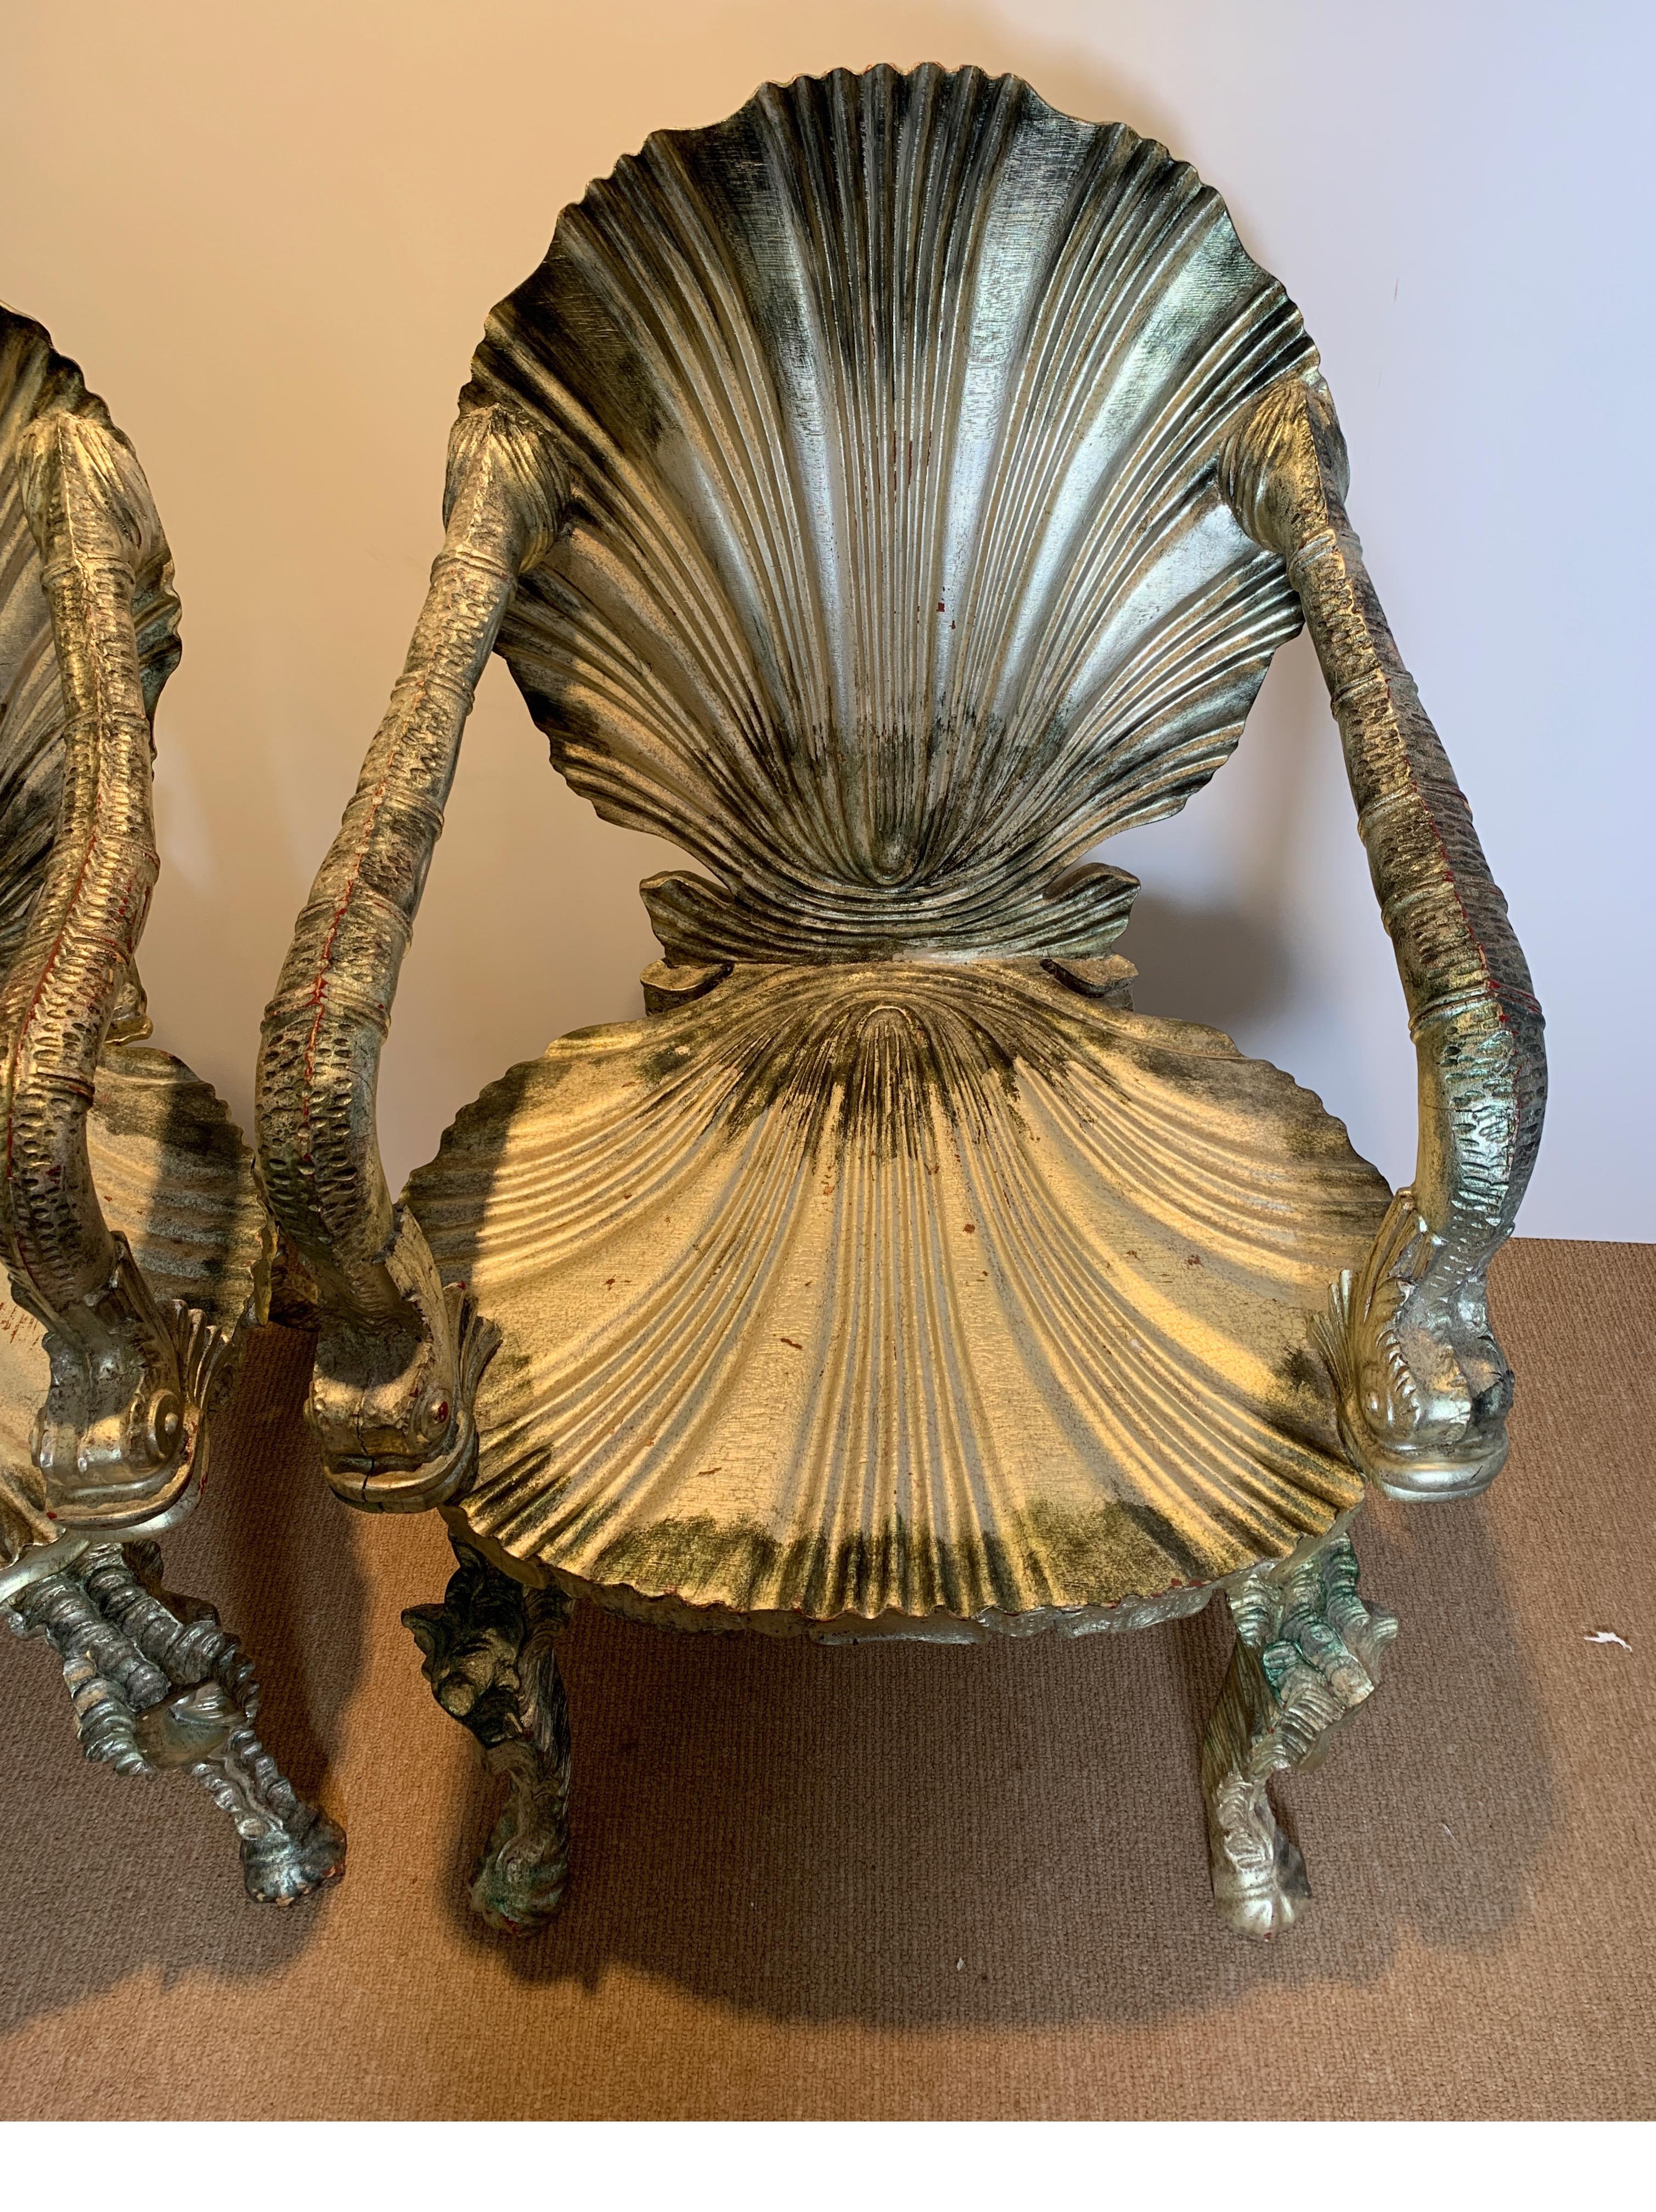 Hardwood Pair of Antique Silver Leaf Grotto Chairs